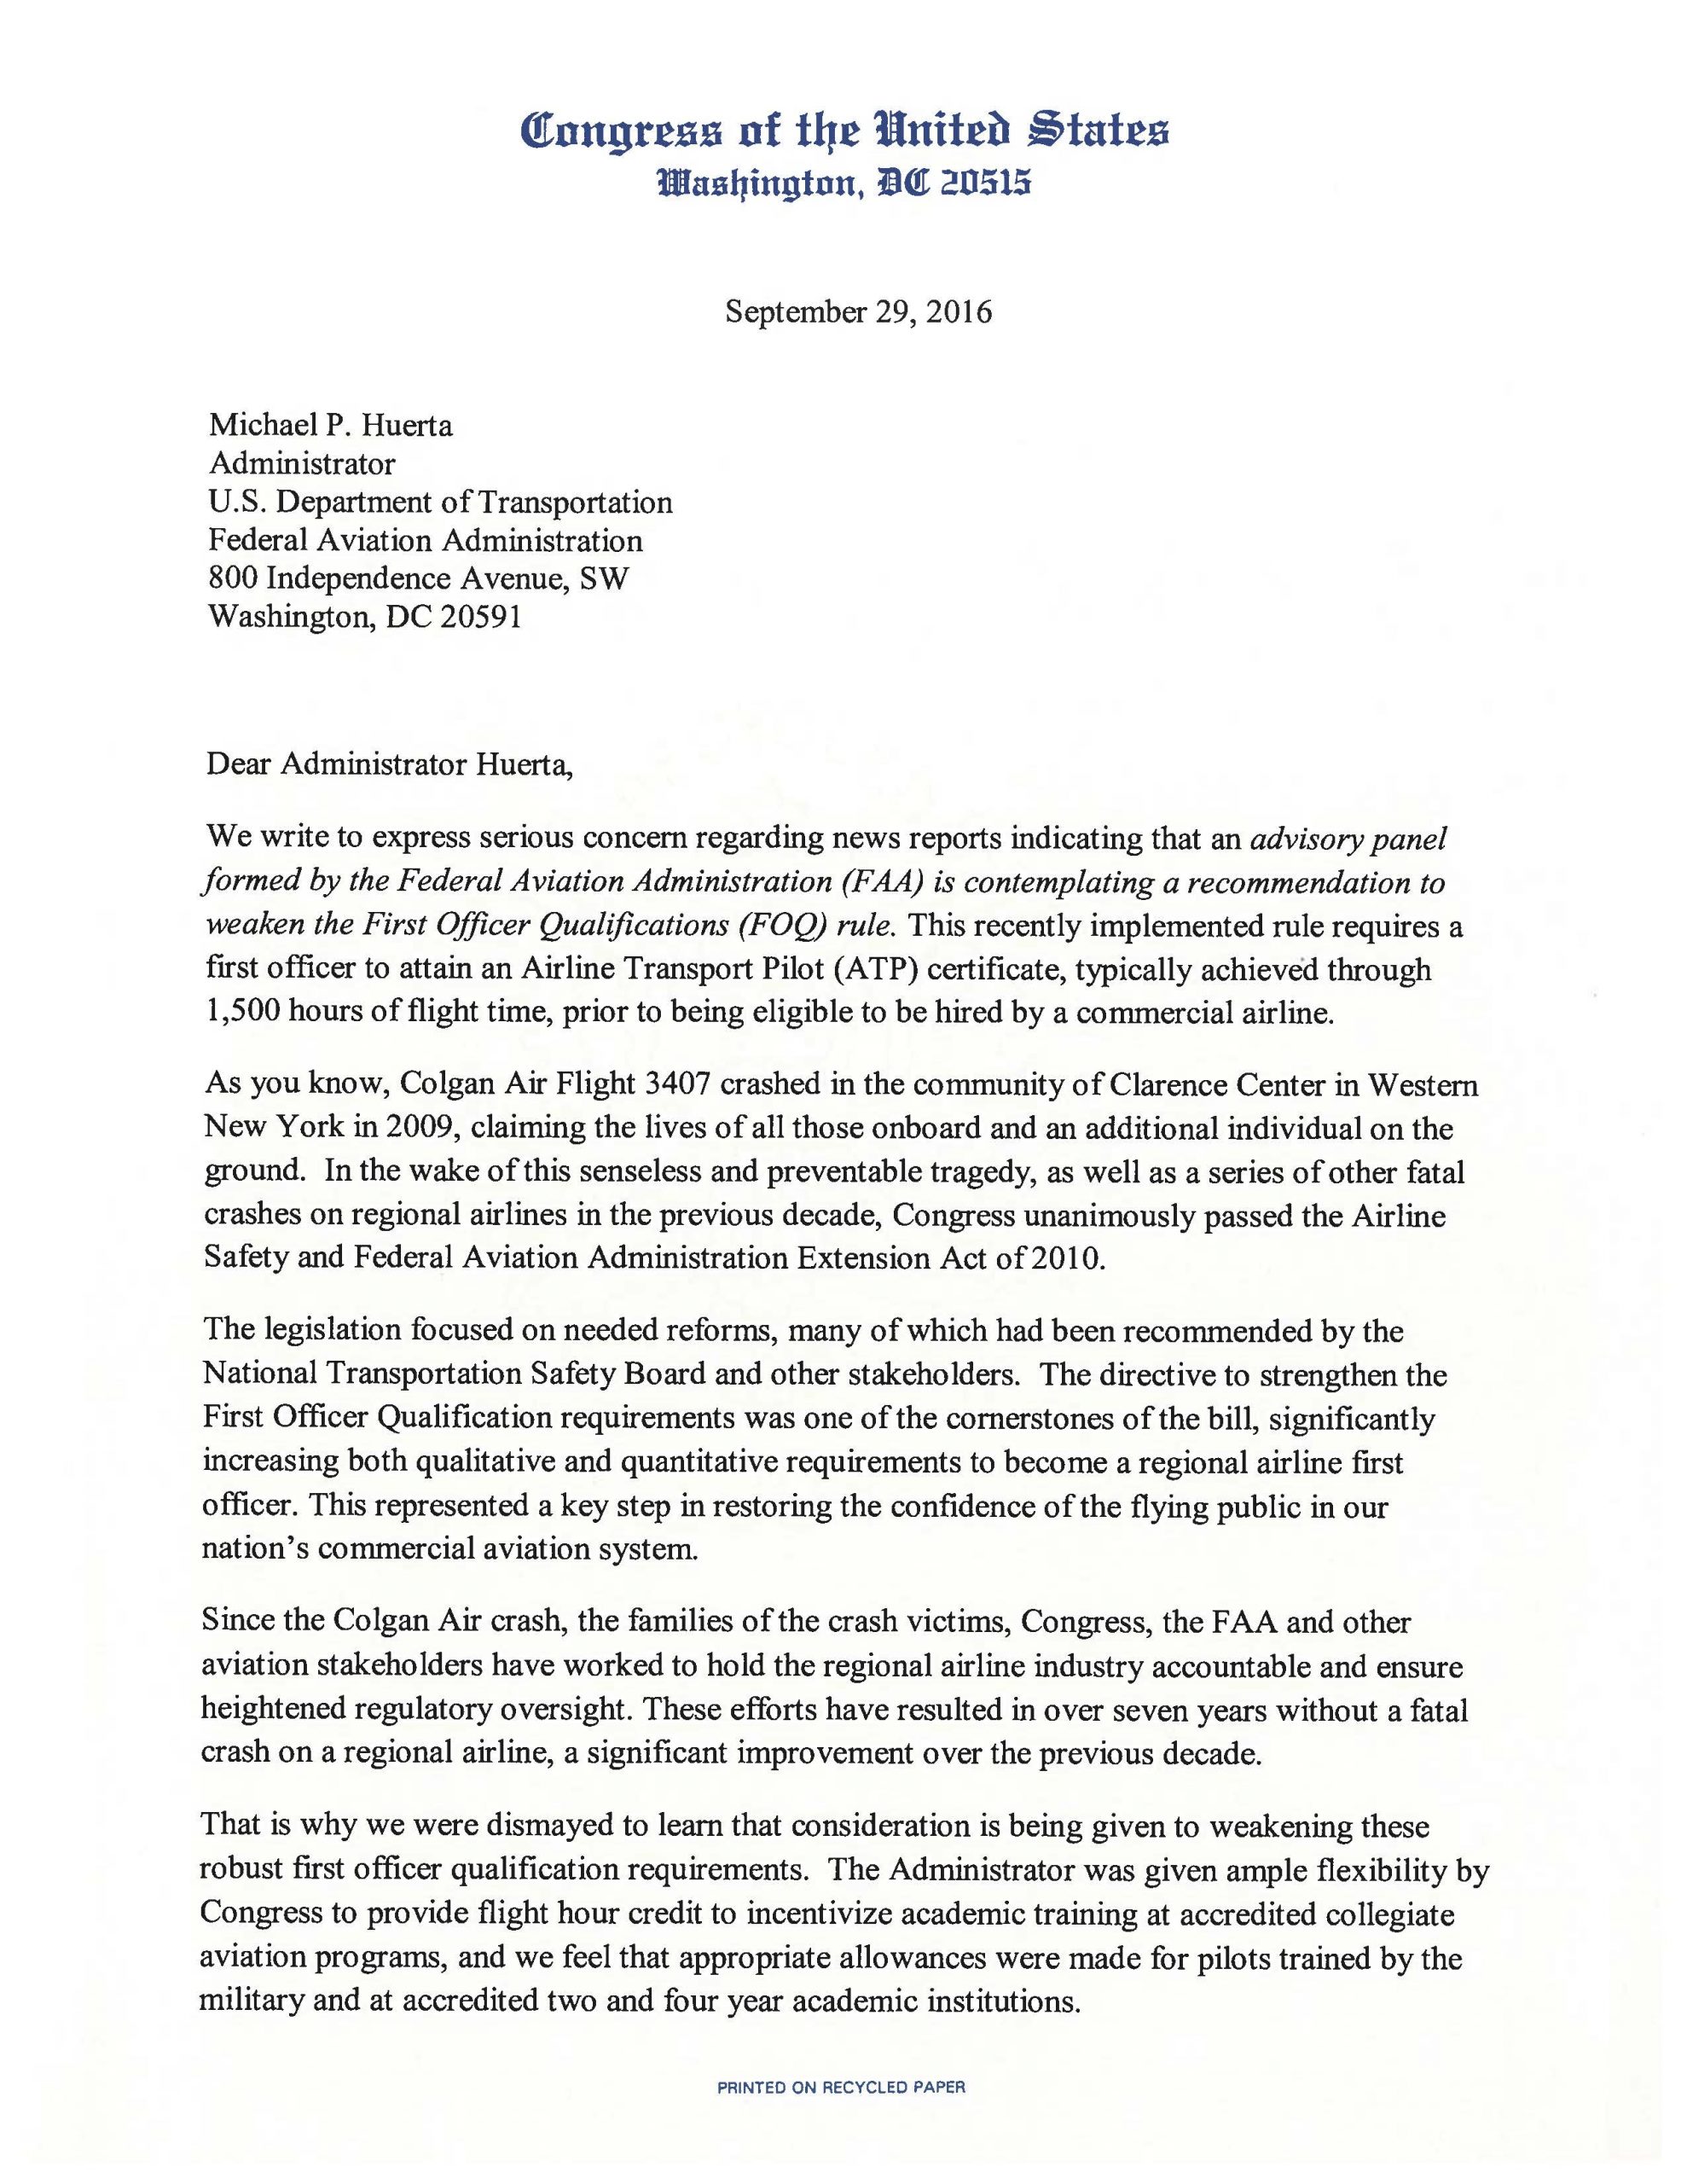 Sample Letter Of Recommendation For Congressional Nomination